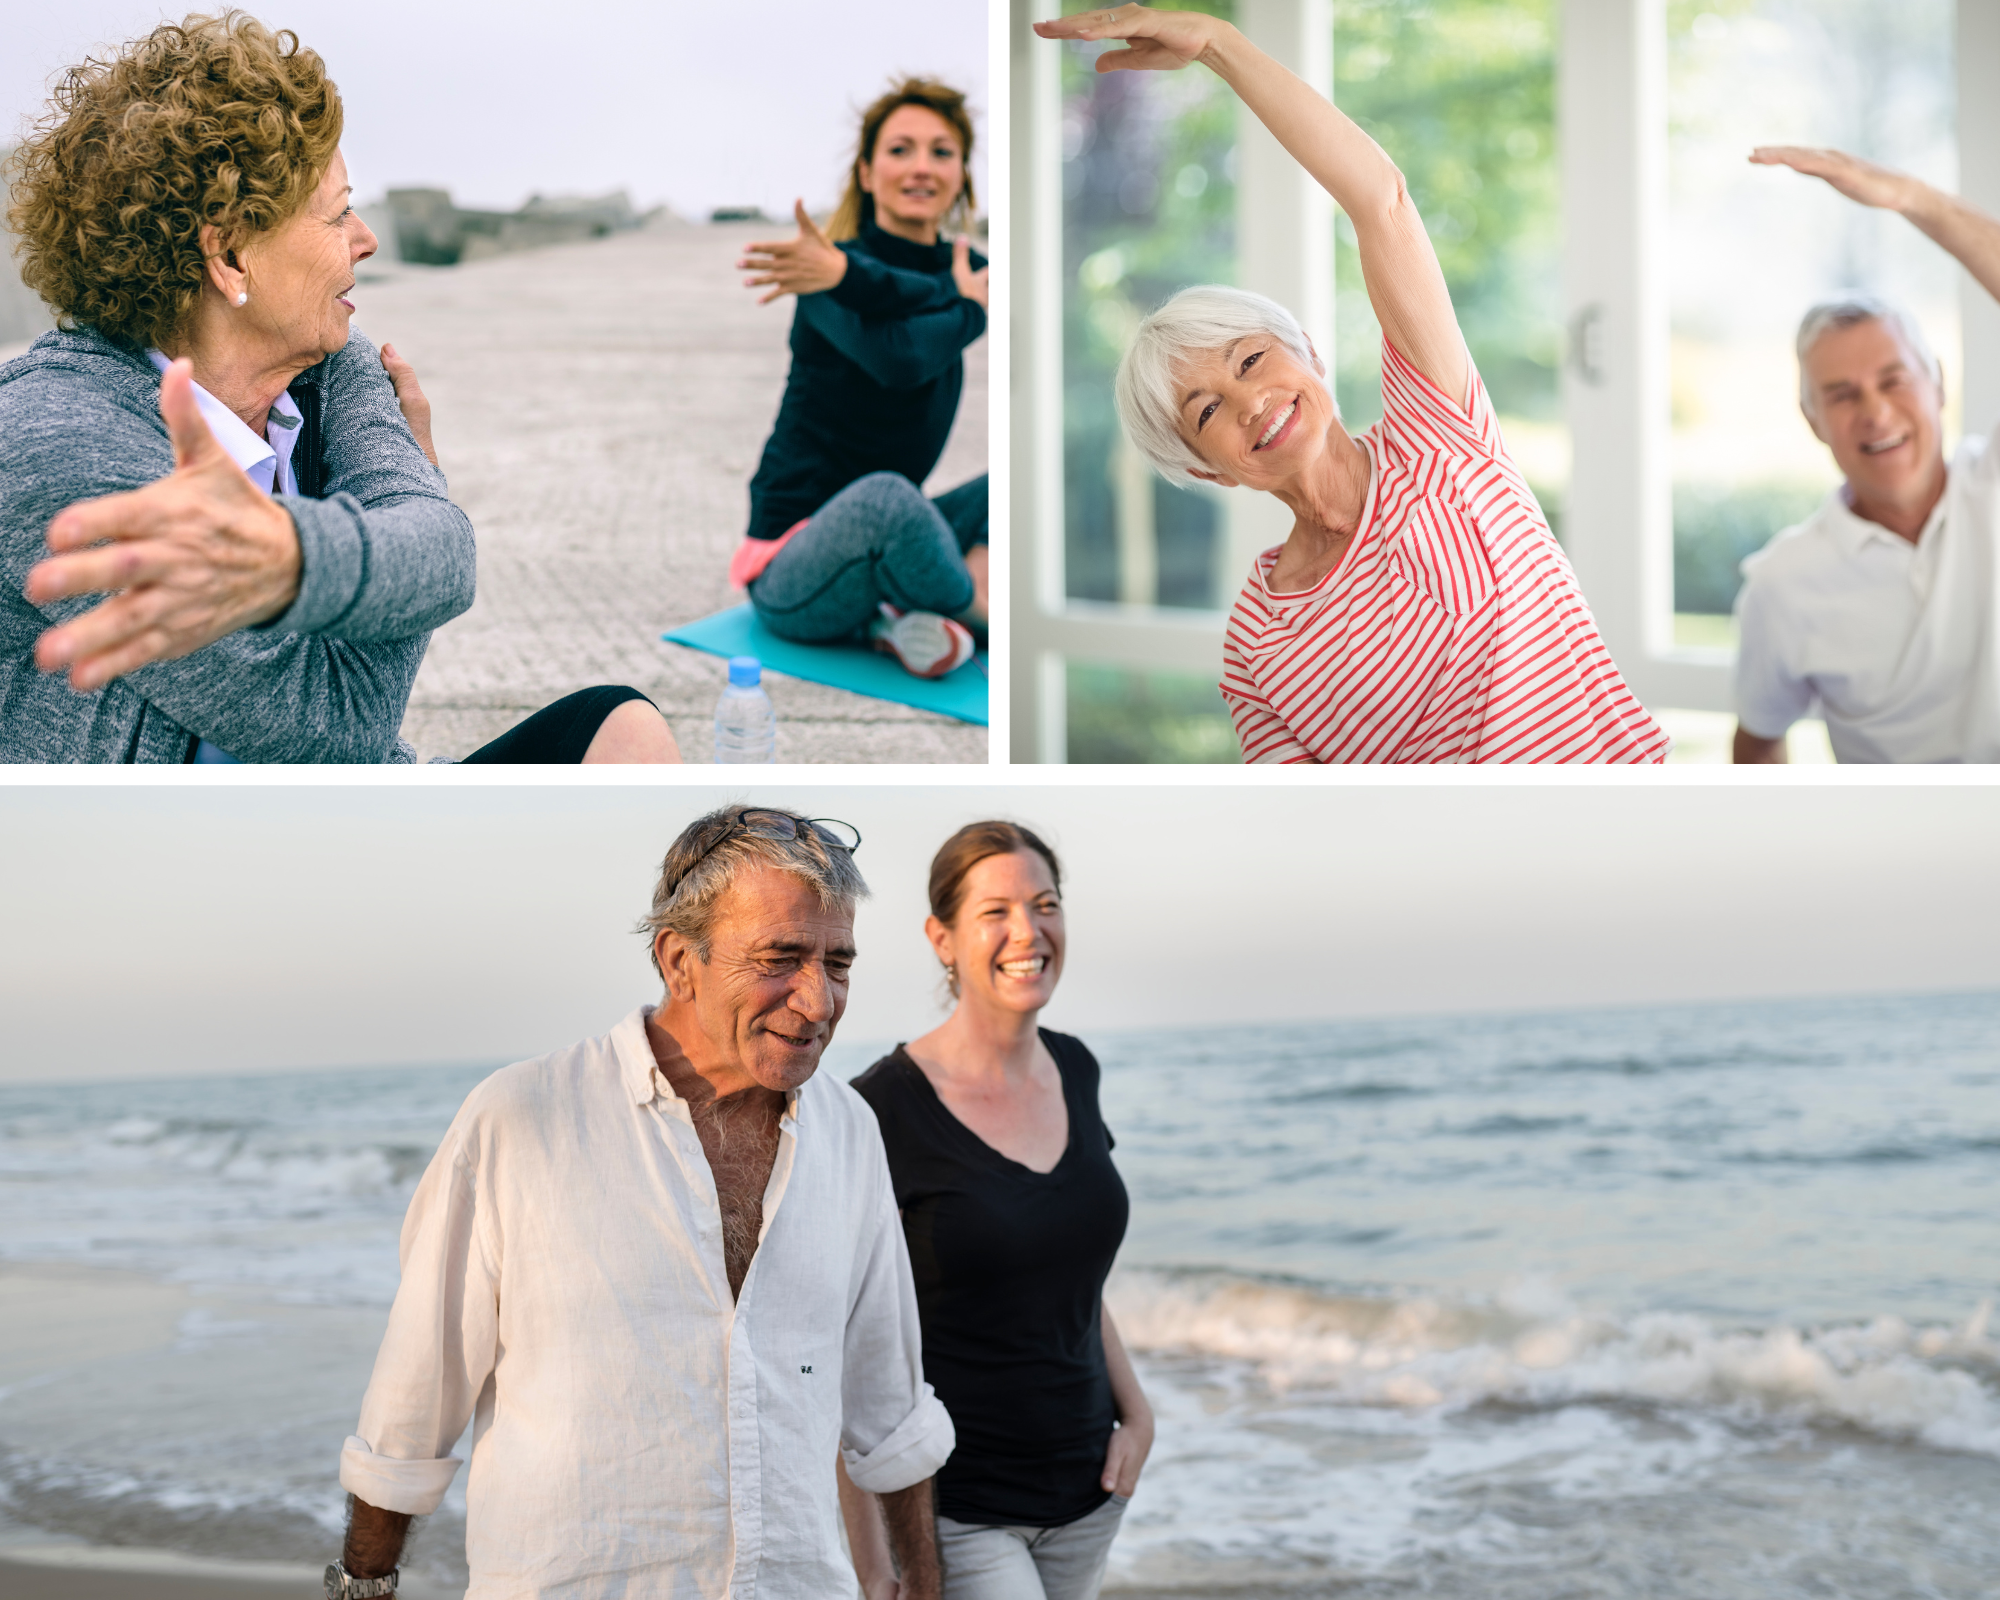 Exercises a Caregiver and Senior Can do Together